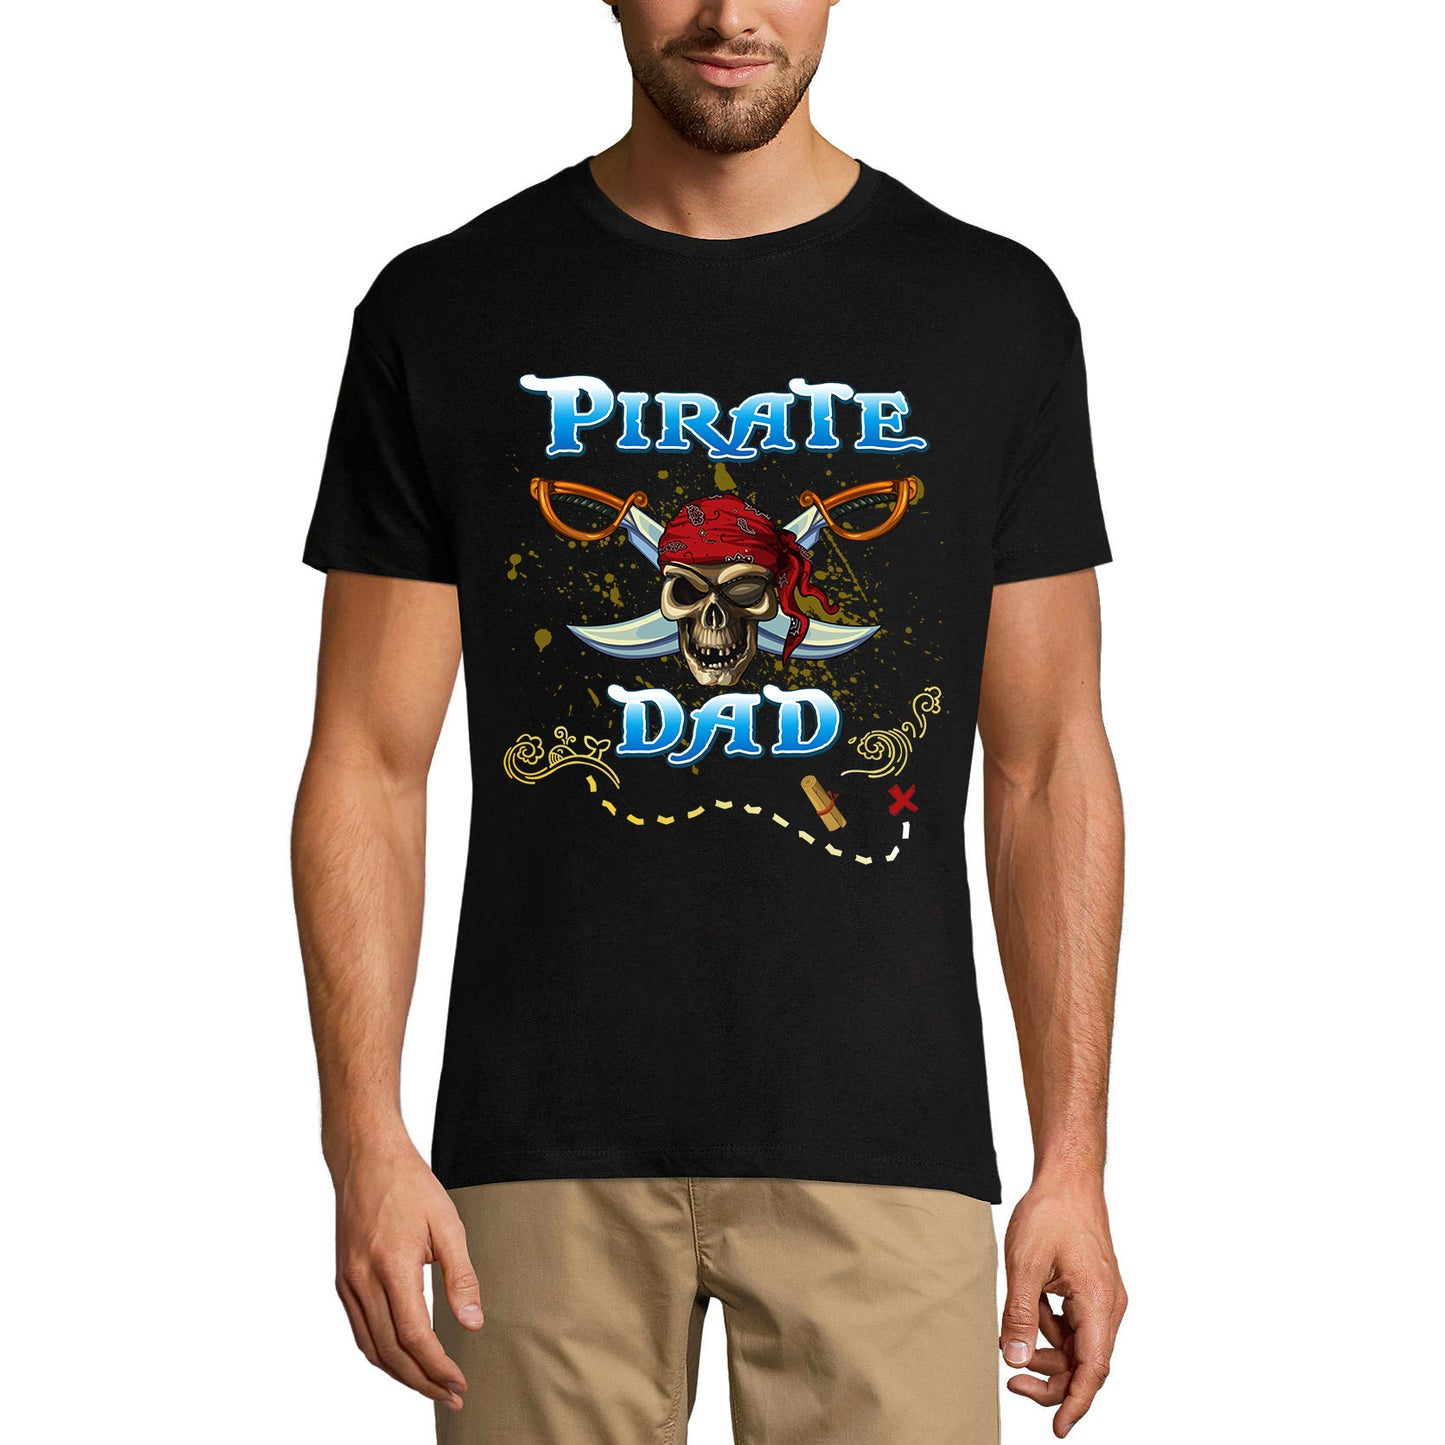 ULTRABASIC Men's Graphic T-Shirt Pirate Dad - Scary Pirate Skull - Funny Shirt